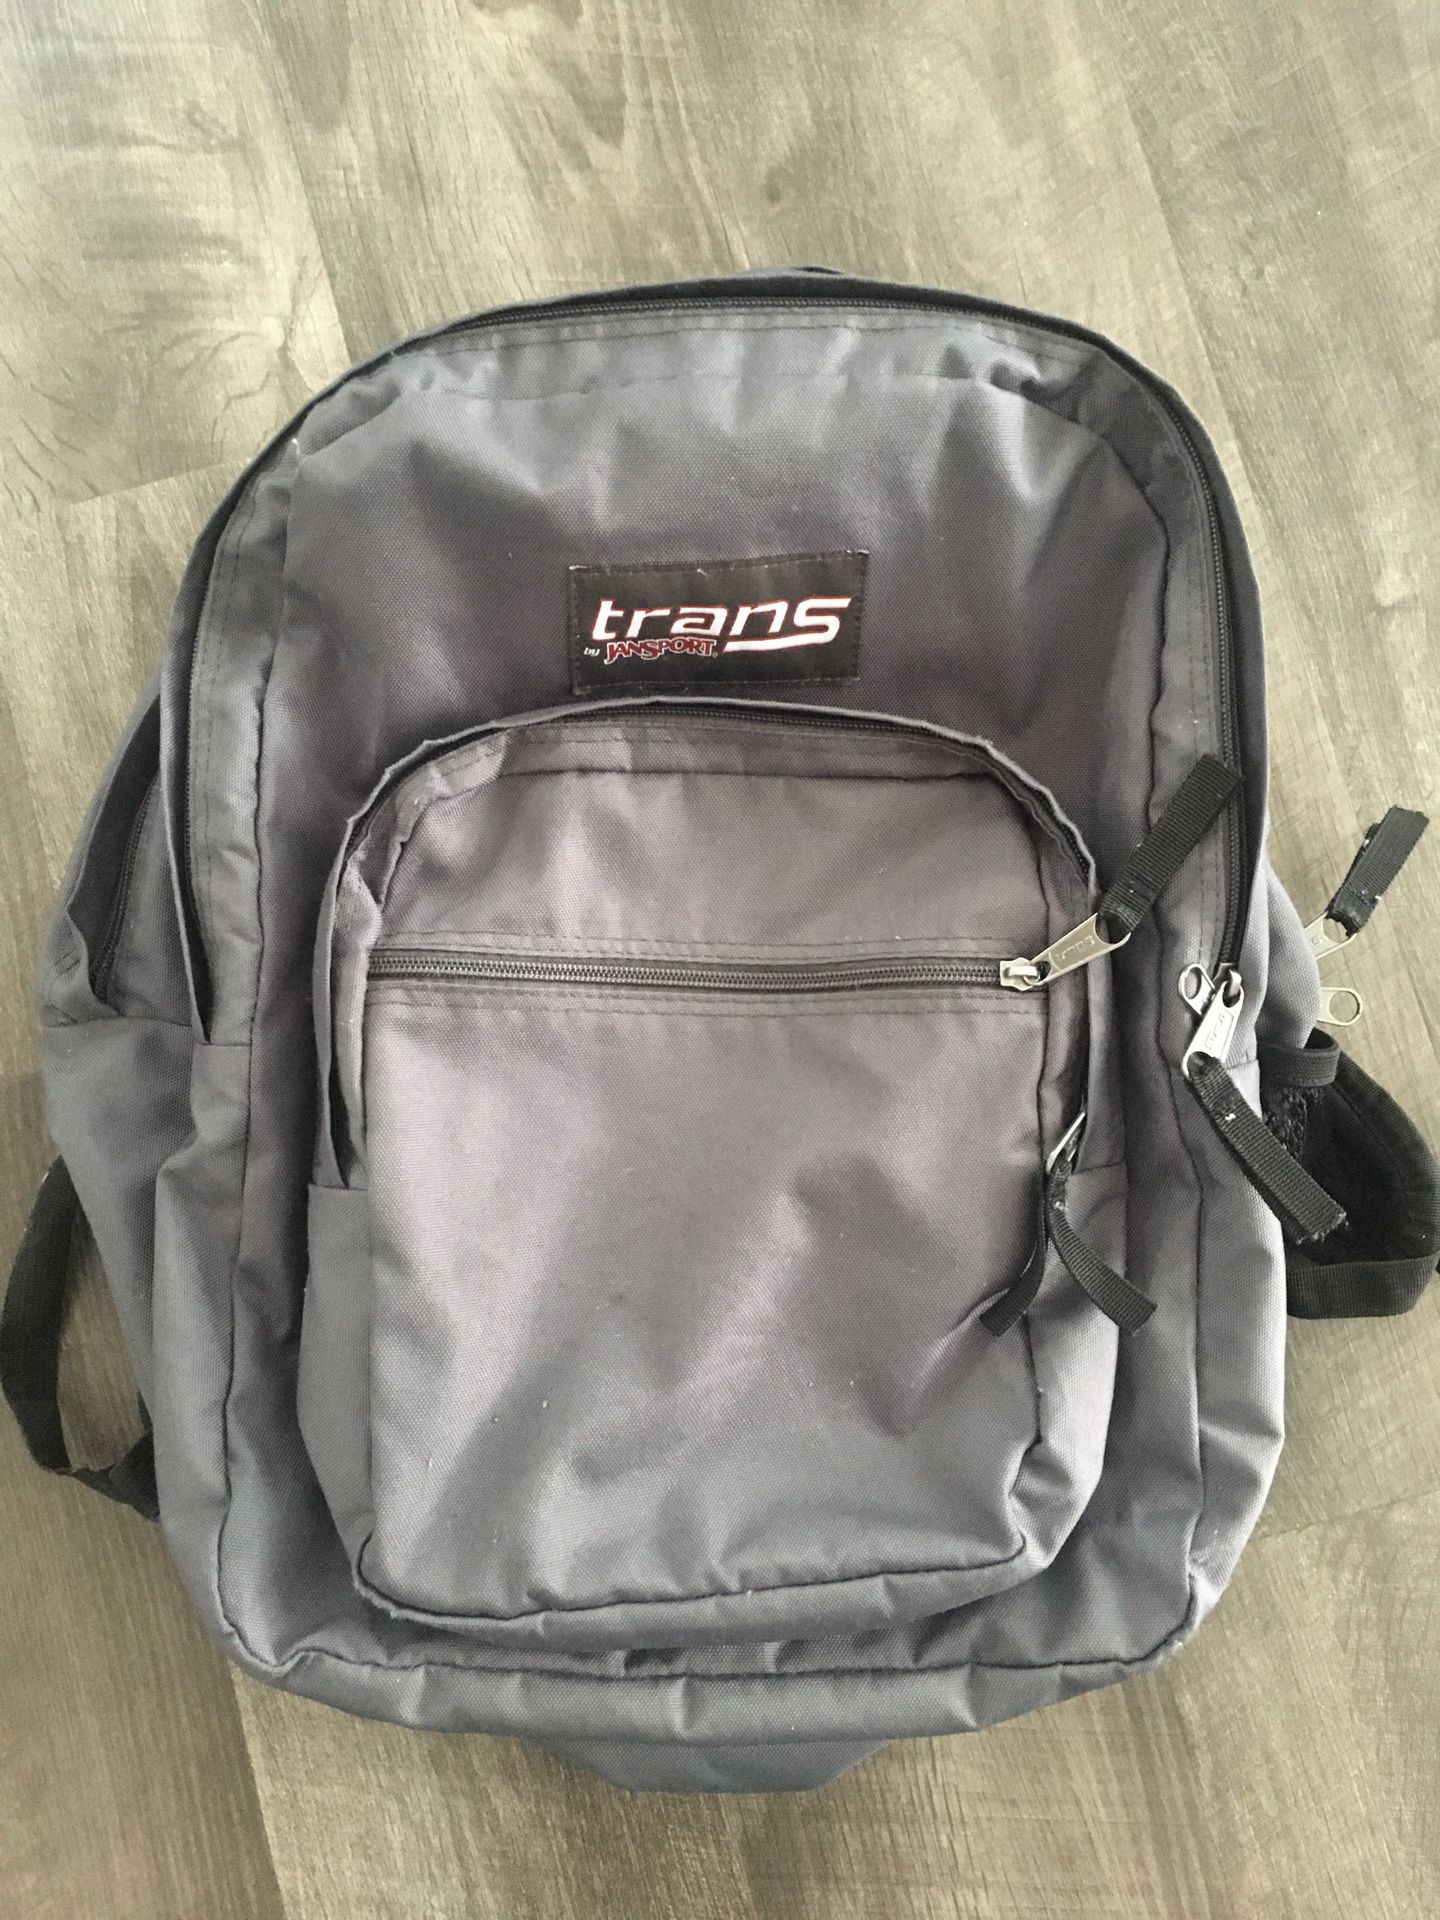 Grey Transvby Jansport Backpack - Excellent Condition